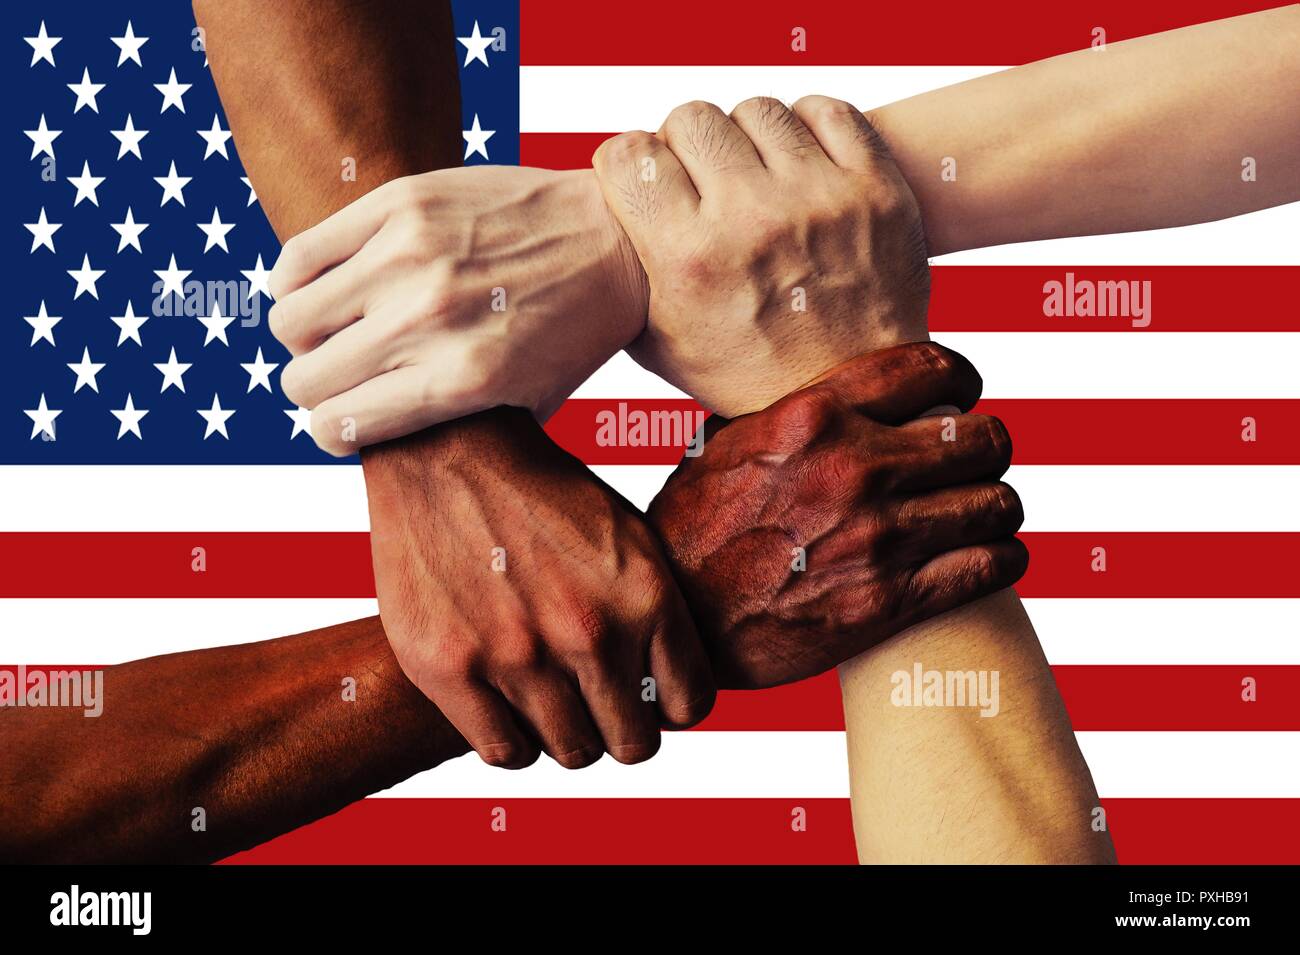 United States Flag multicultural group of young people integration diversity isolated. Stock Photo